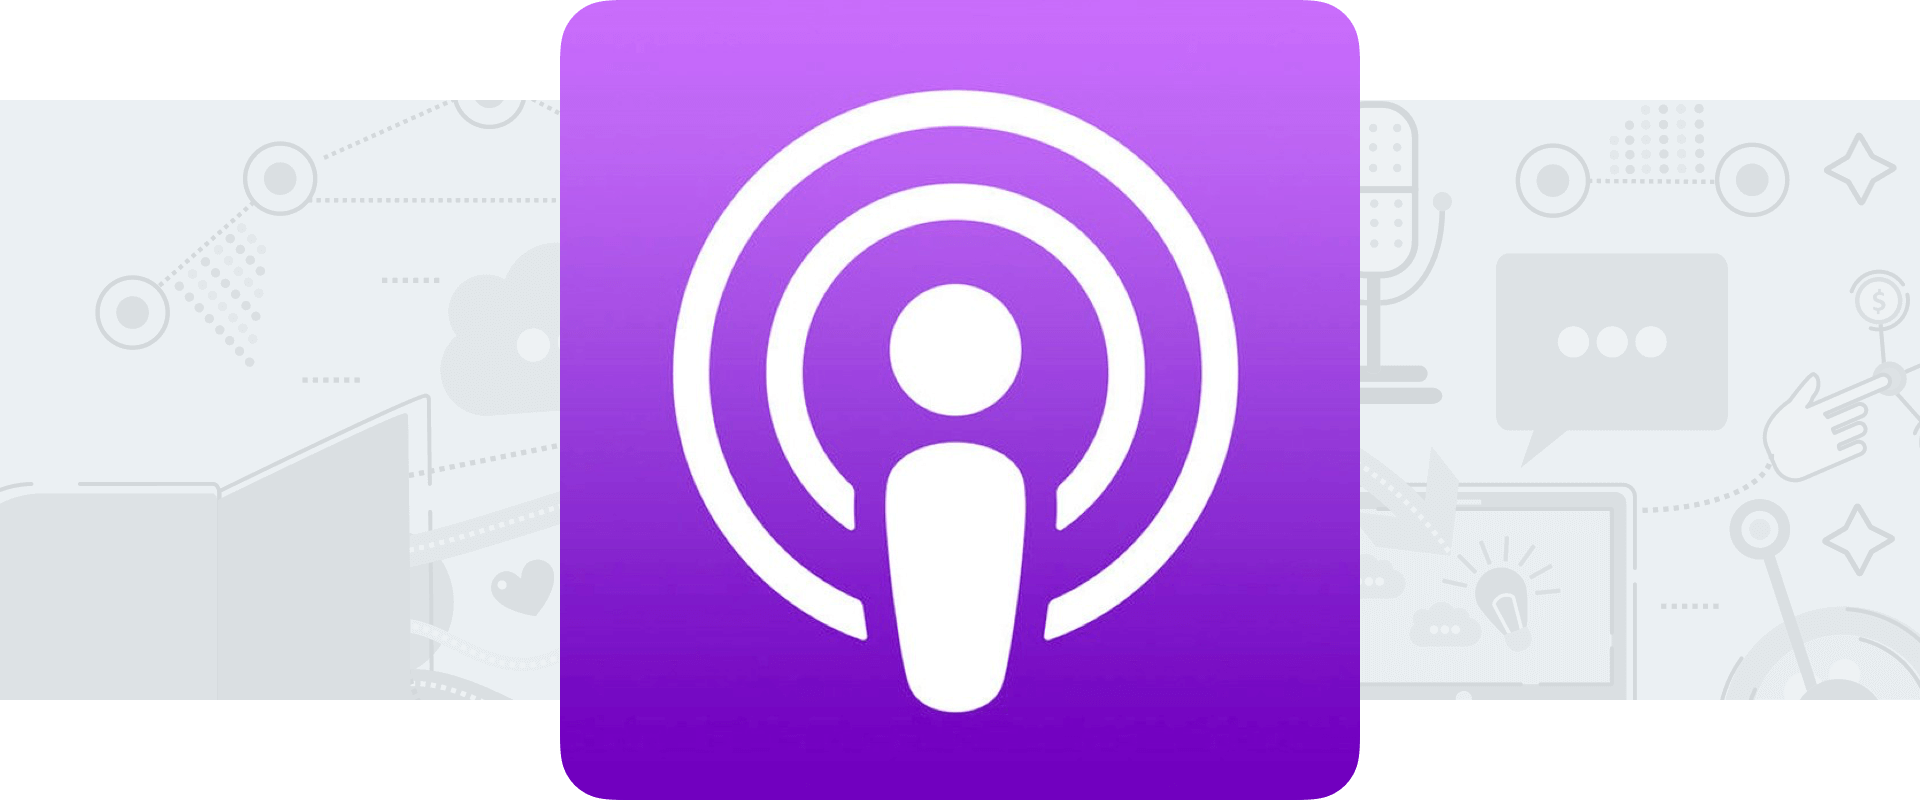 Apple Podcasts Categories (2019 Update)